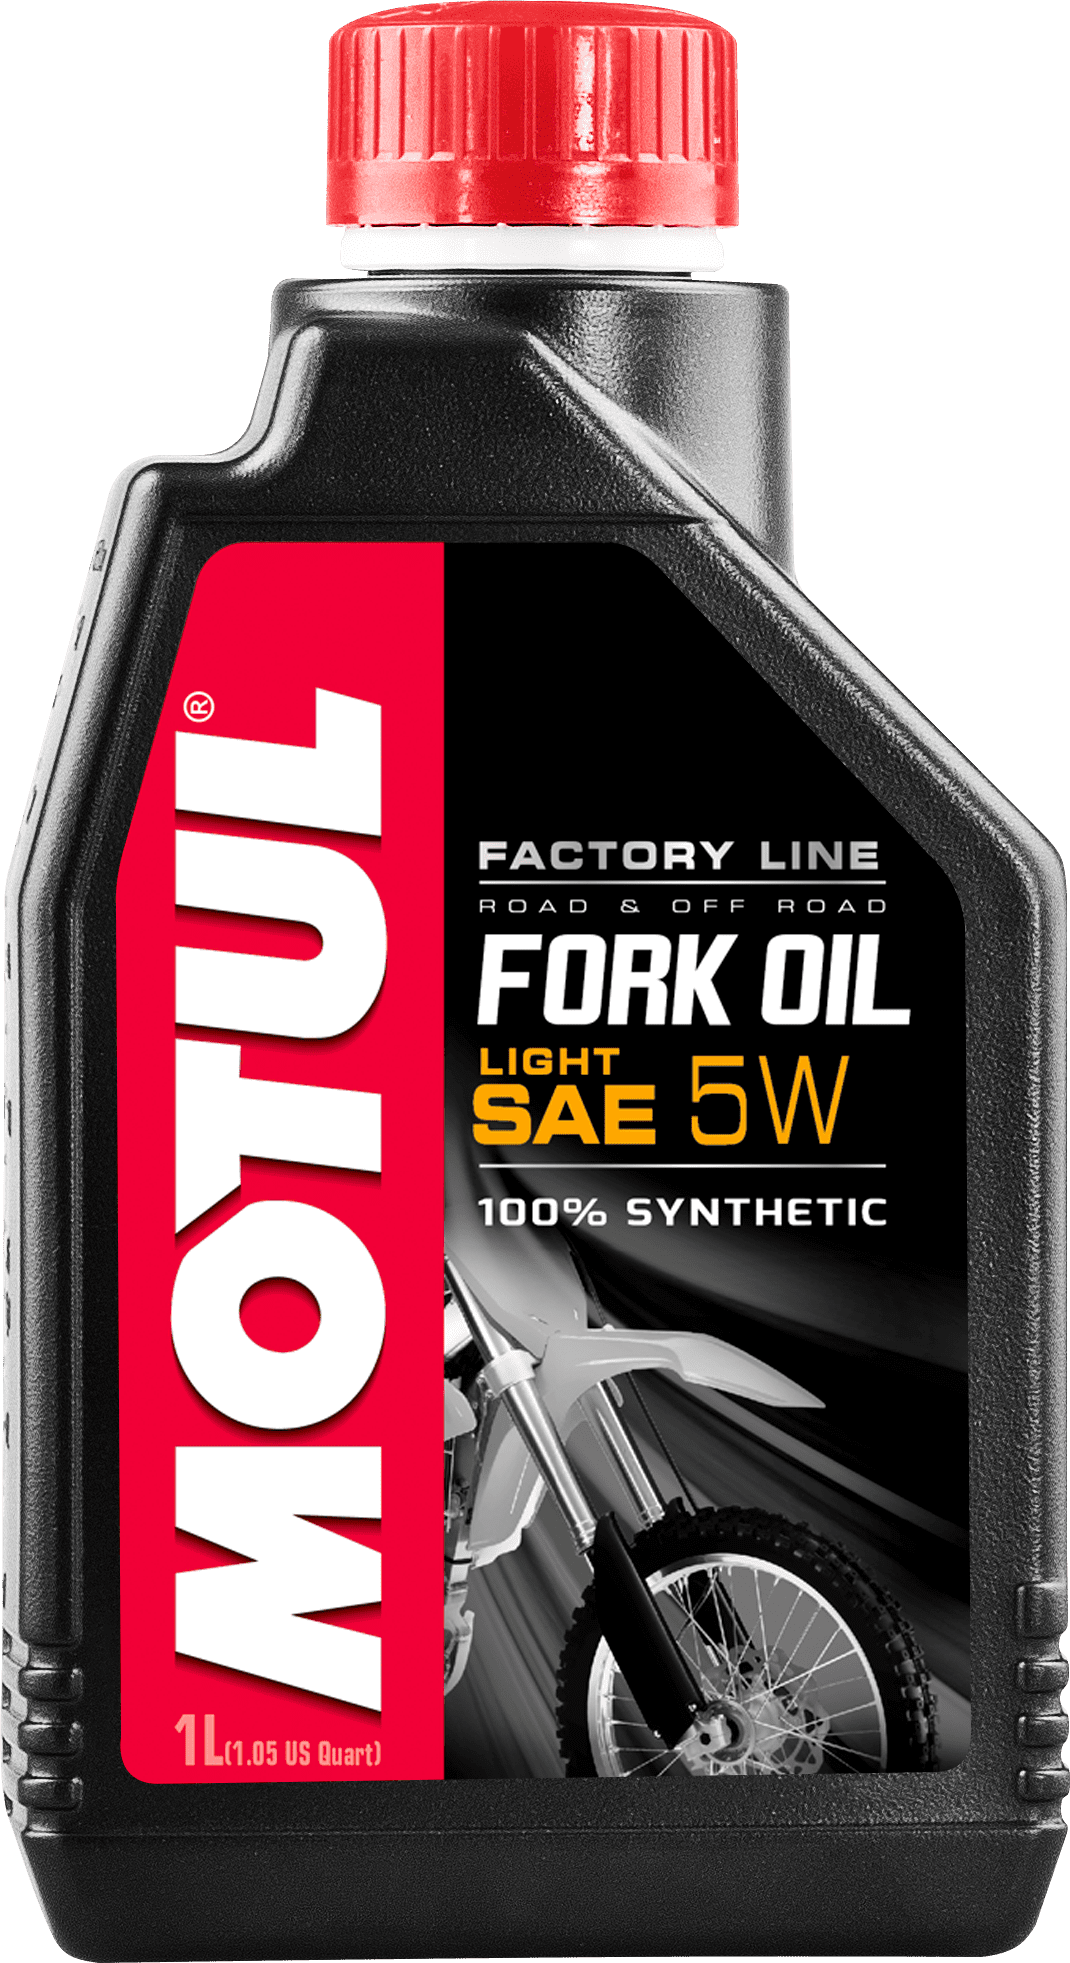 105924-1 100% synthetic high performance hydraulic fluid for racing telescopic Forks.